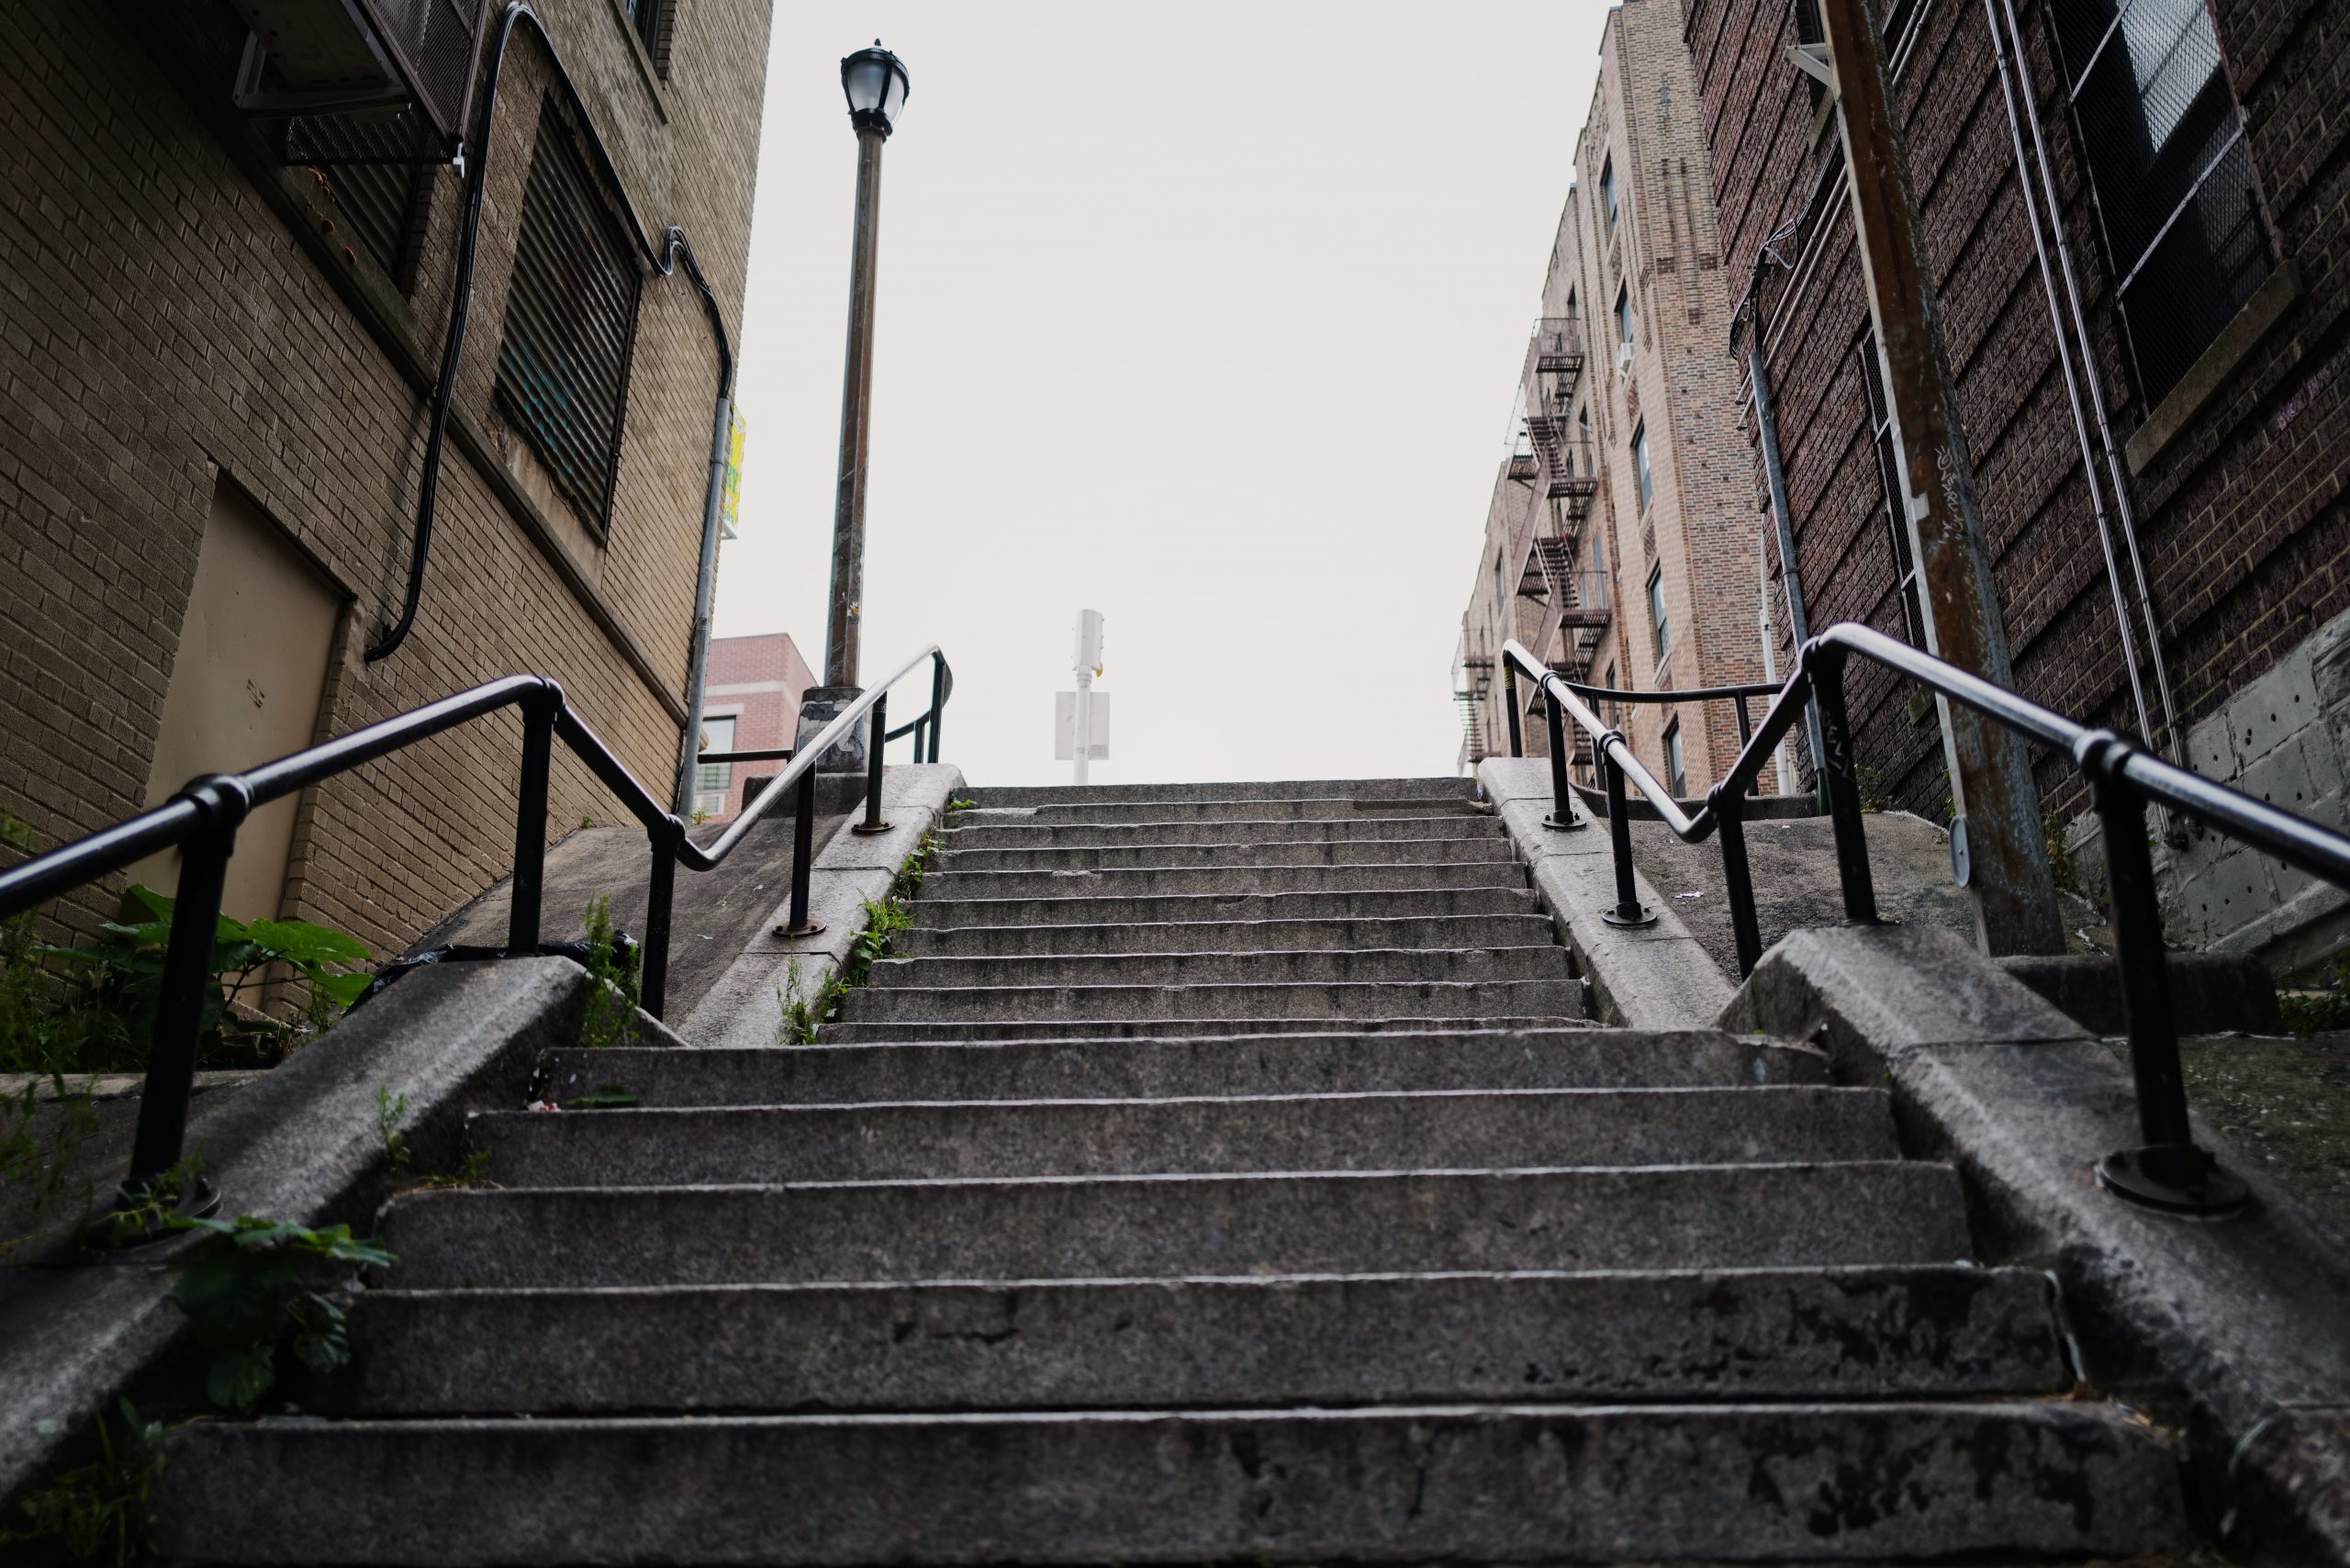 Stairs in Bronx NY which appeared in the movie The Joker